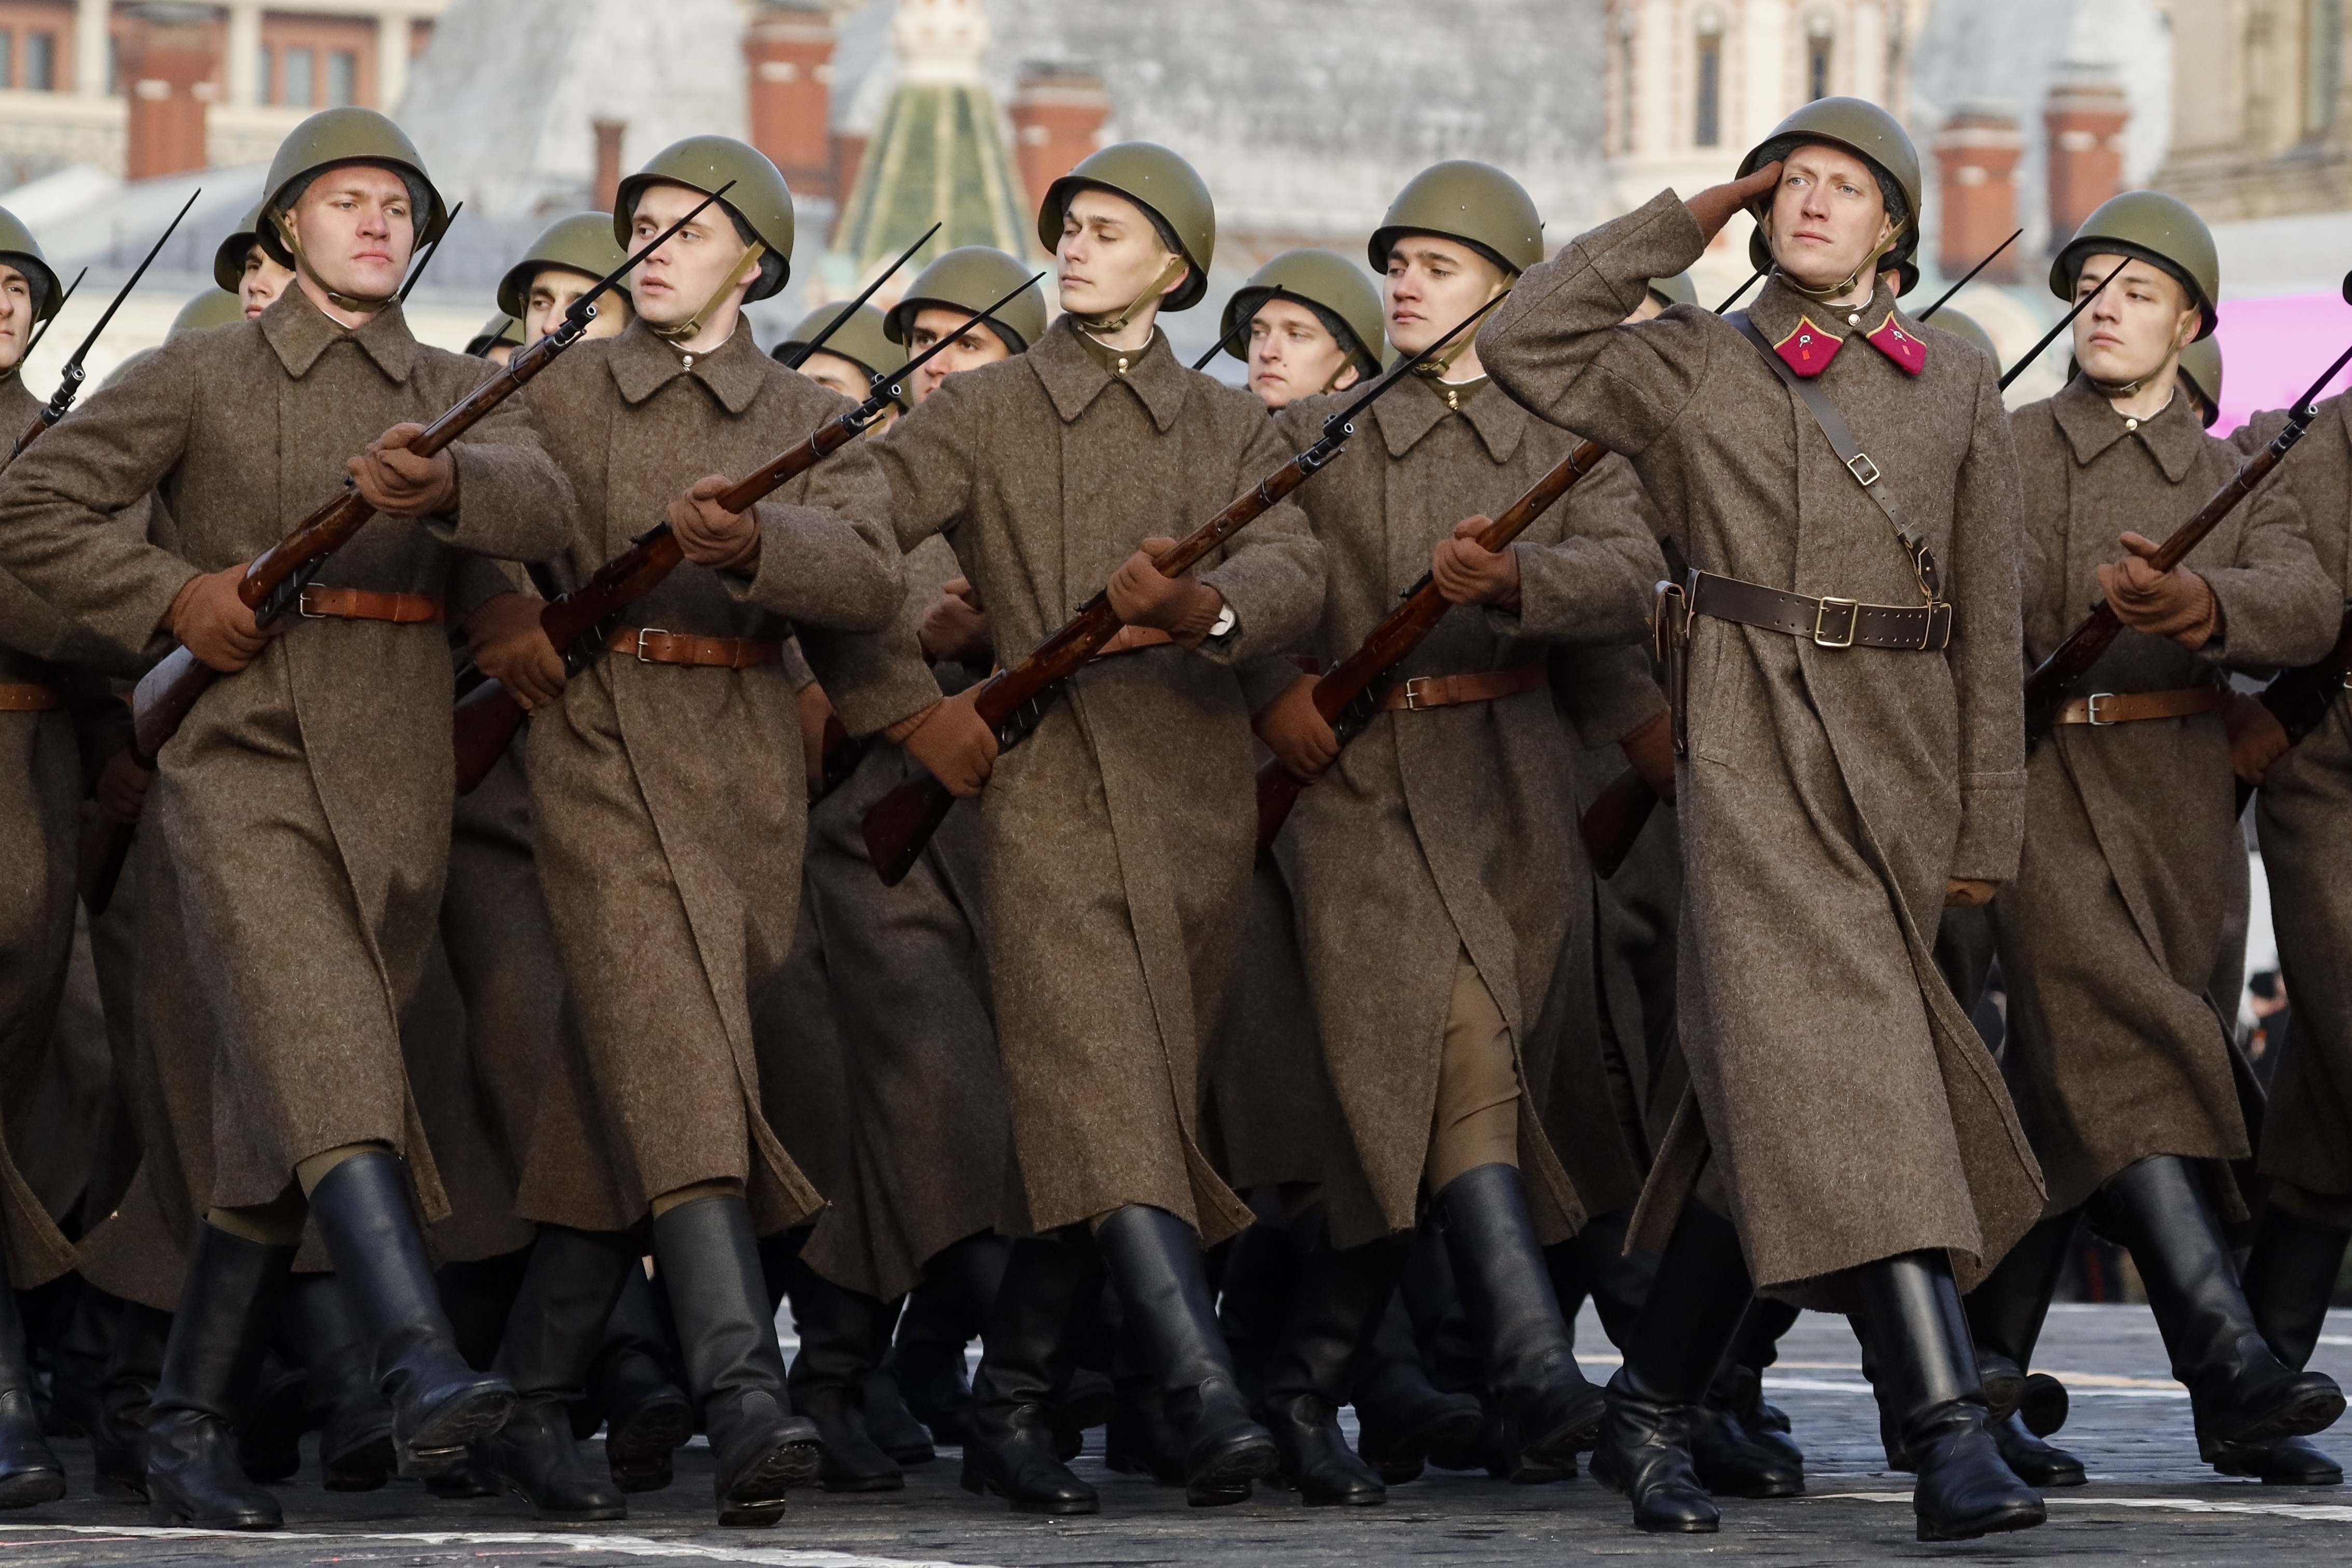 Russian soldiers dressed in Red Army World War II uniform march during the Nov. 7 parade in Red Square, in Moscow, Russia, Wednesday, Nov. 7, 2018. The event marked the 77th anniversary of a World War II historic parade in Red Square and honored the participants in the Nov. 7, 1941 parade who headed directly to the front lines to defend Moscow from the Nazi forces. (AP Photo/Alexander Zemlianichenko)